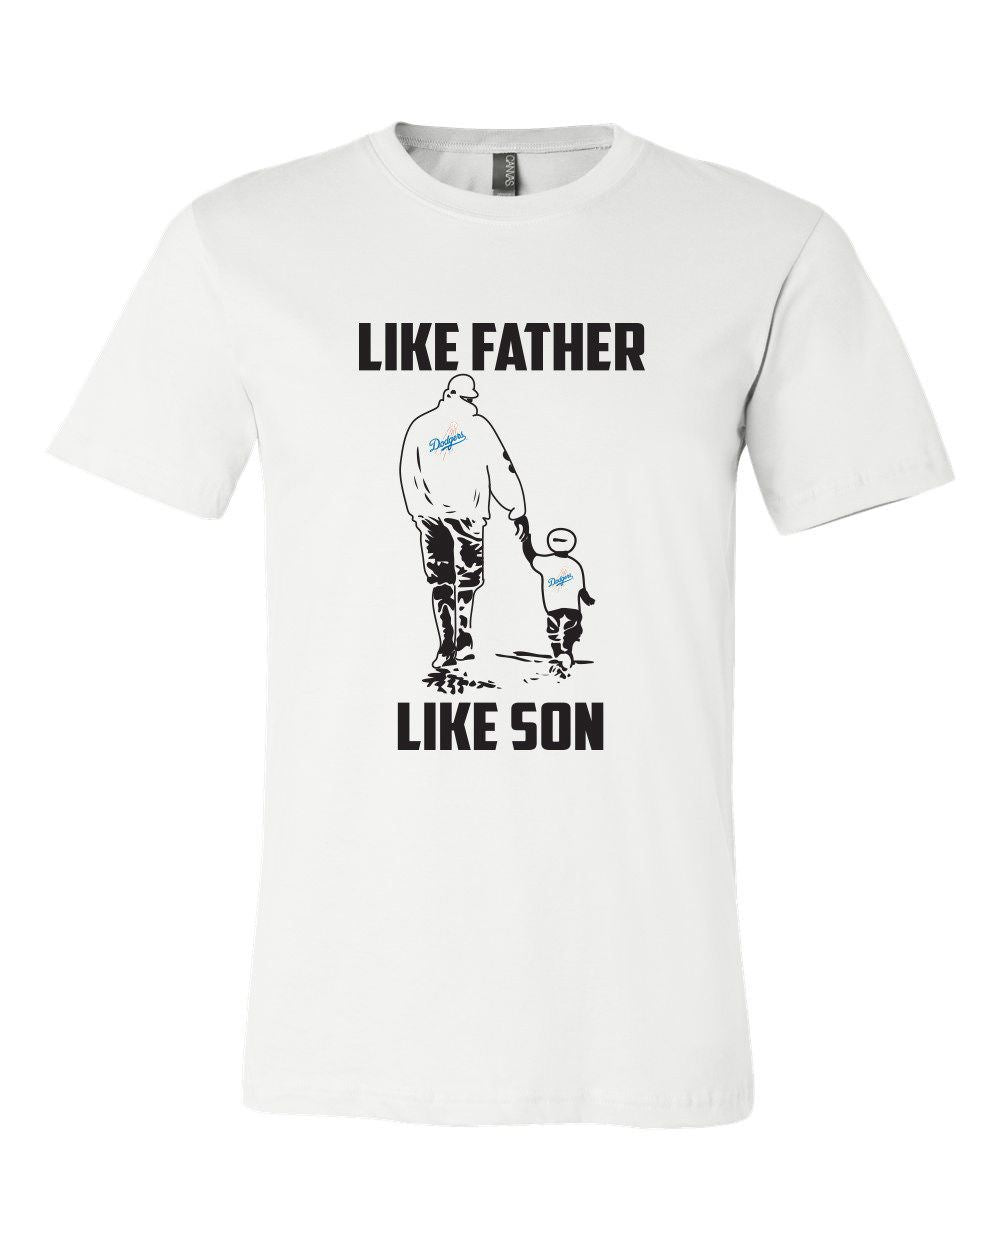 Los Angeles Dodgers Like Father Like Son T shirt Adult and Youth